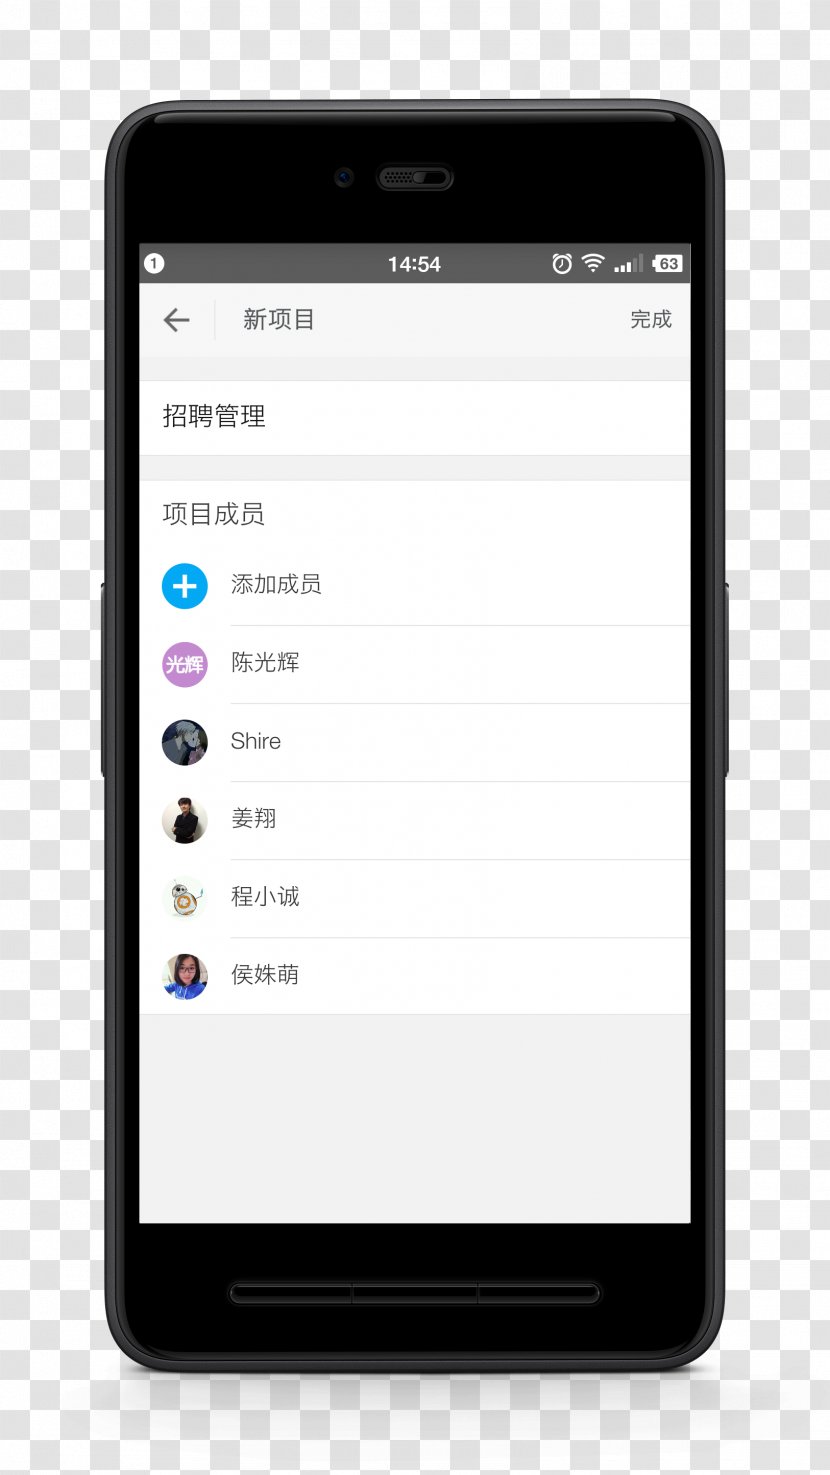 Text Messaging G Suite SMS Google Account Mobile App - Phone - Android 17 And 18 Transparent PNG